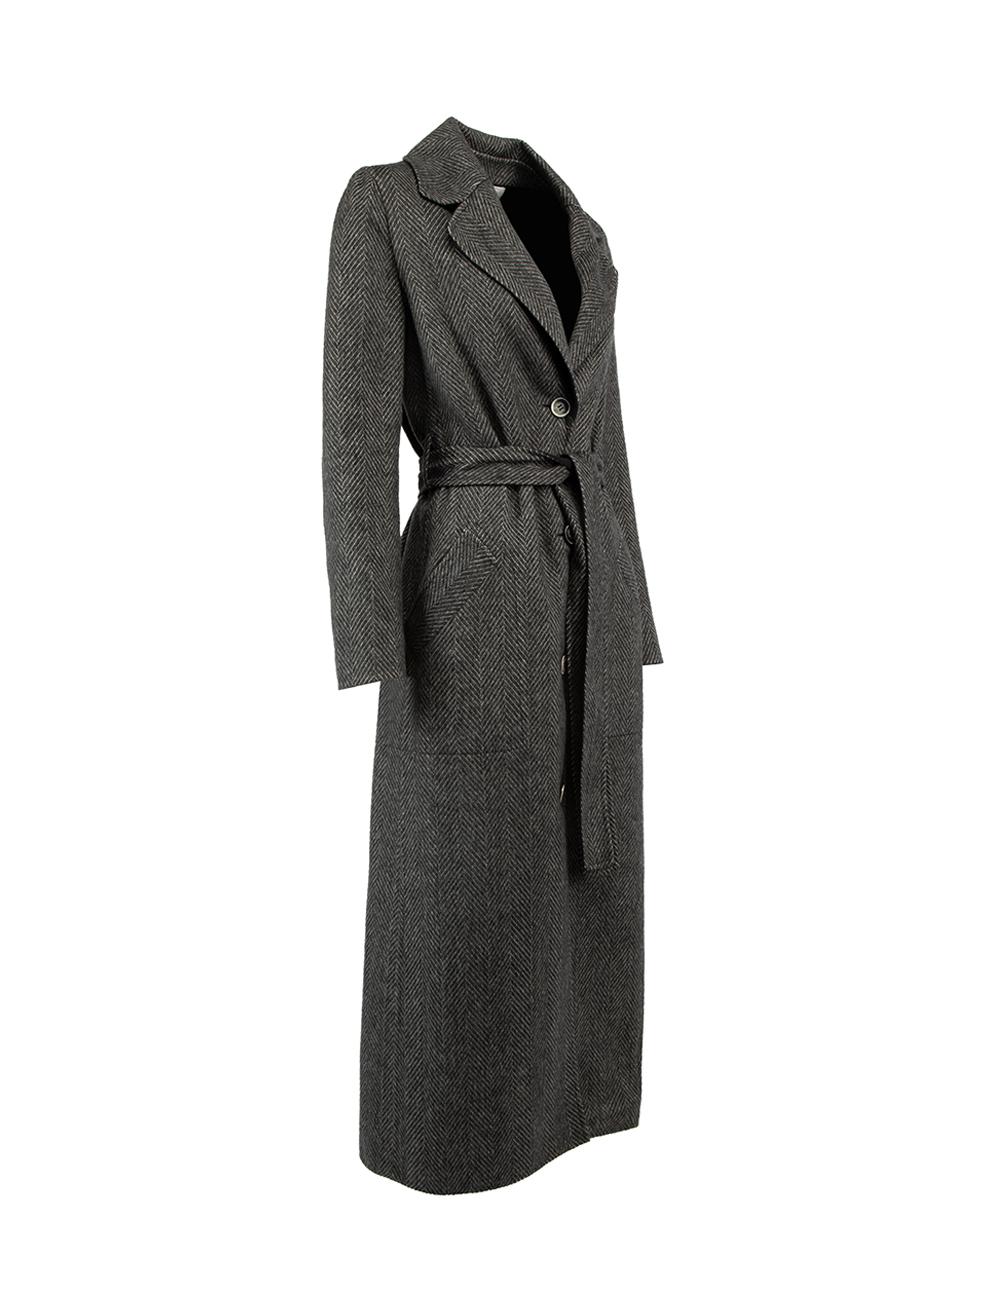 CONDITION is Very good. Hardly any wear to coat is evident. Pilling to cashmere fabric and slight discolouring to brand label can be seen on this used Gabriela Hearst designer resale item. Details Multicolour- Grey and black Cashmere Reversible coat